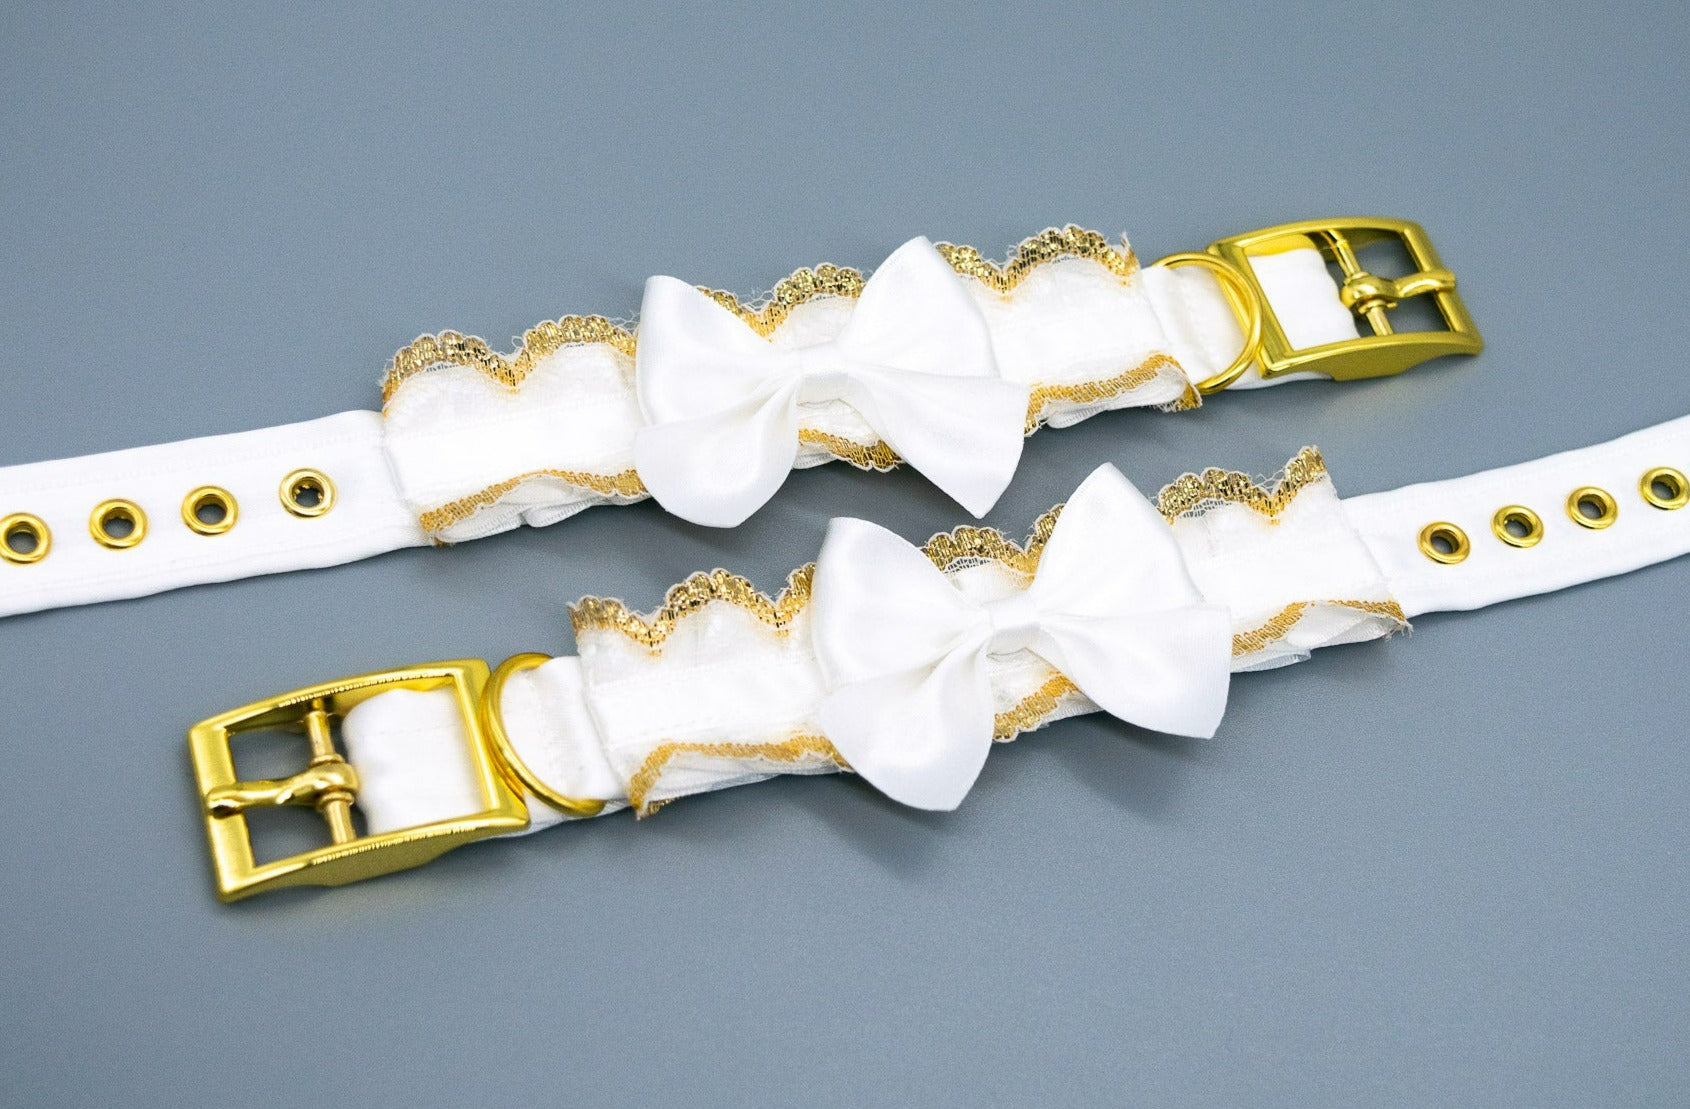 White Lace BDSM Cuffs in Gold